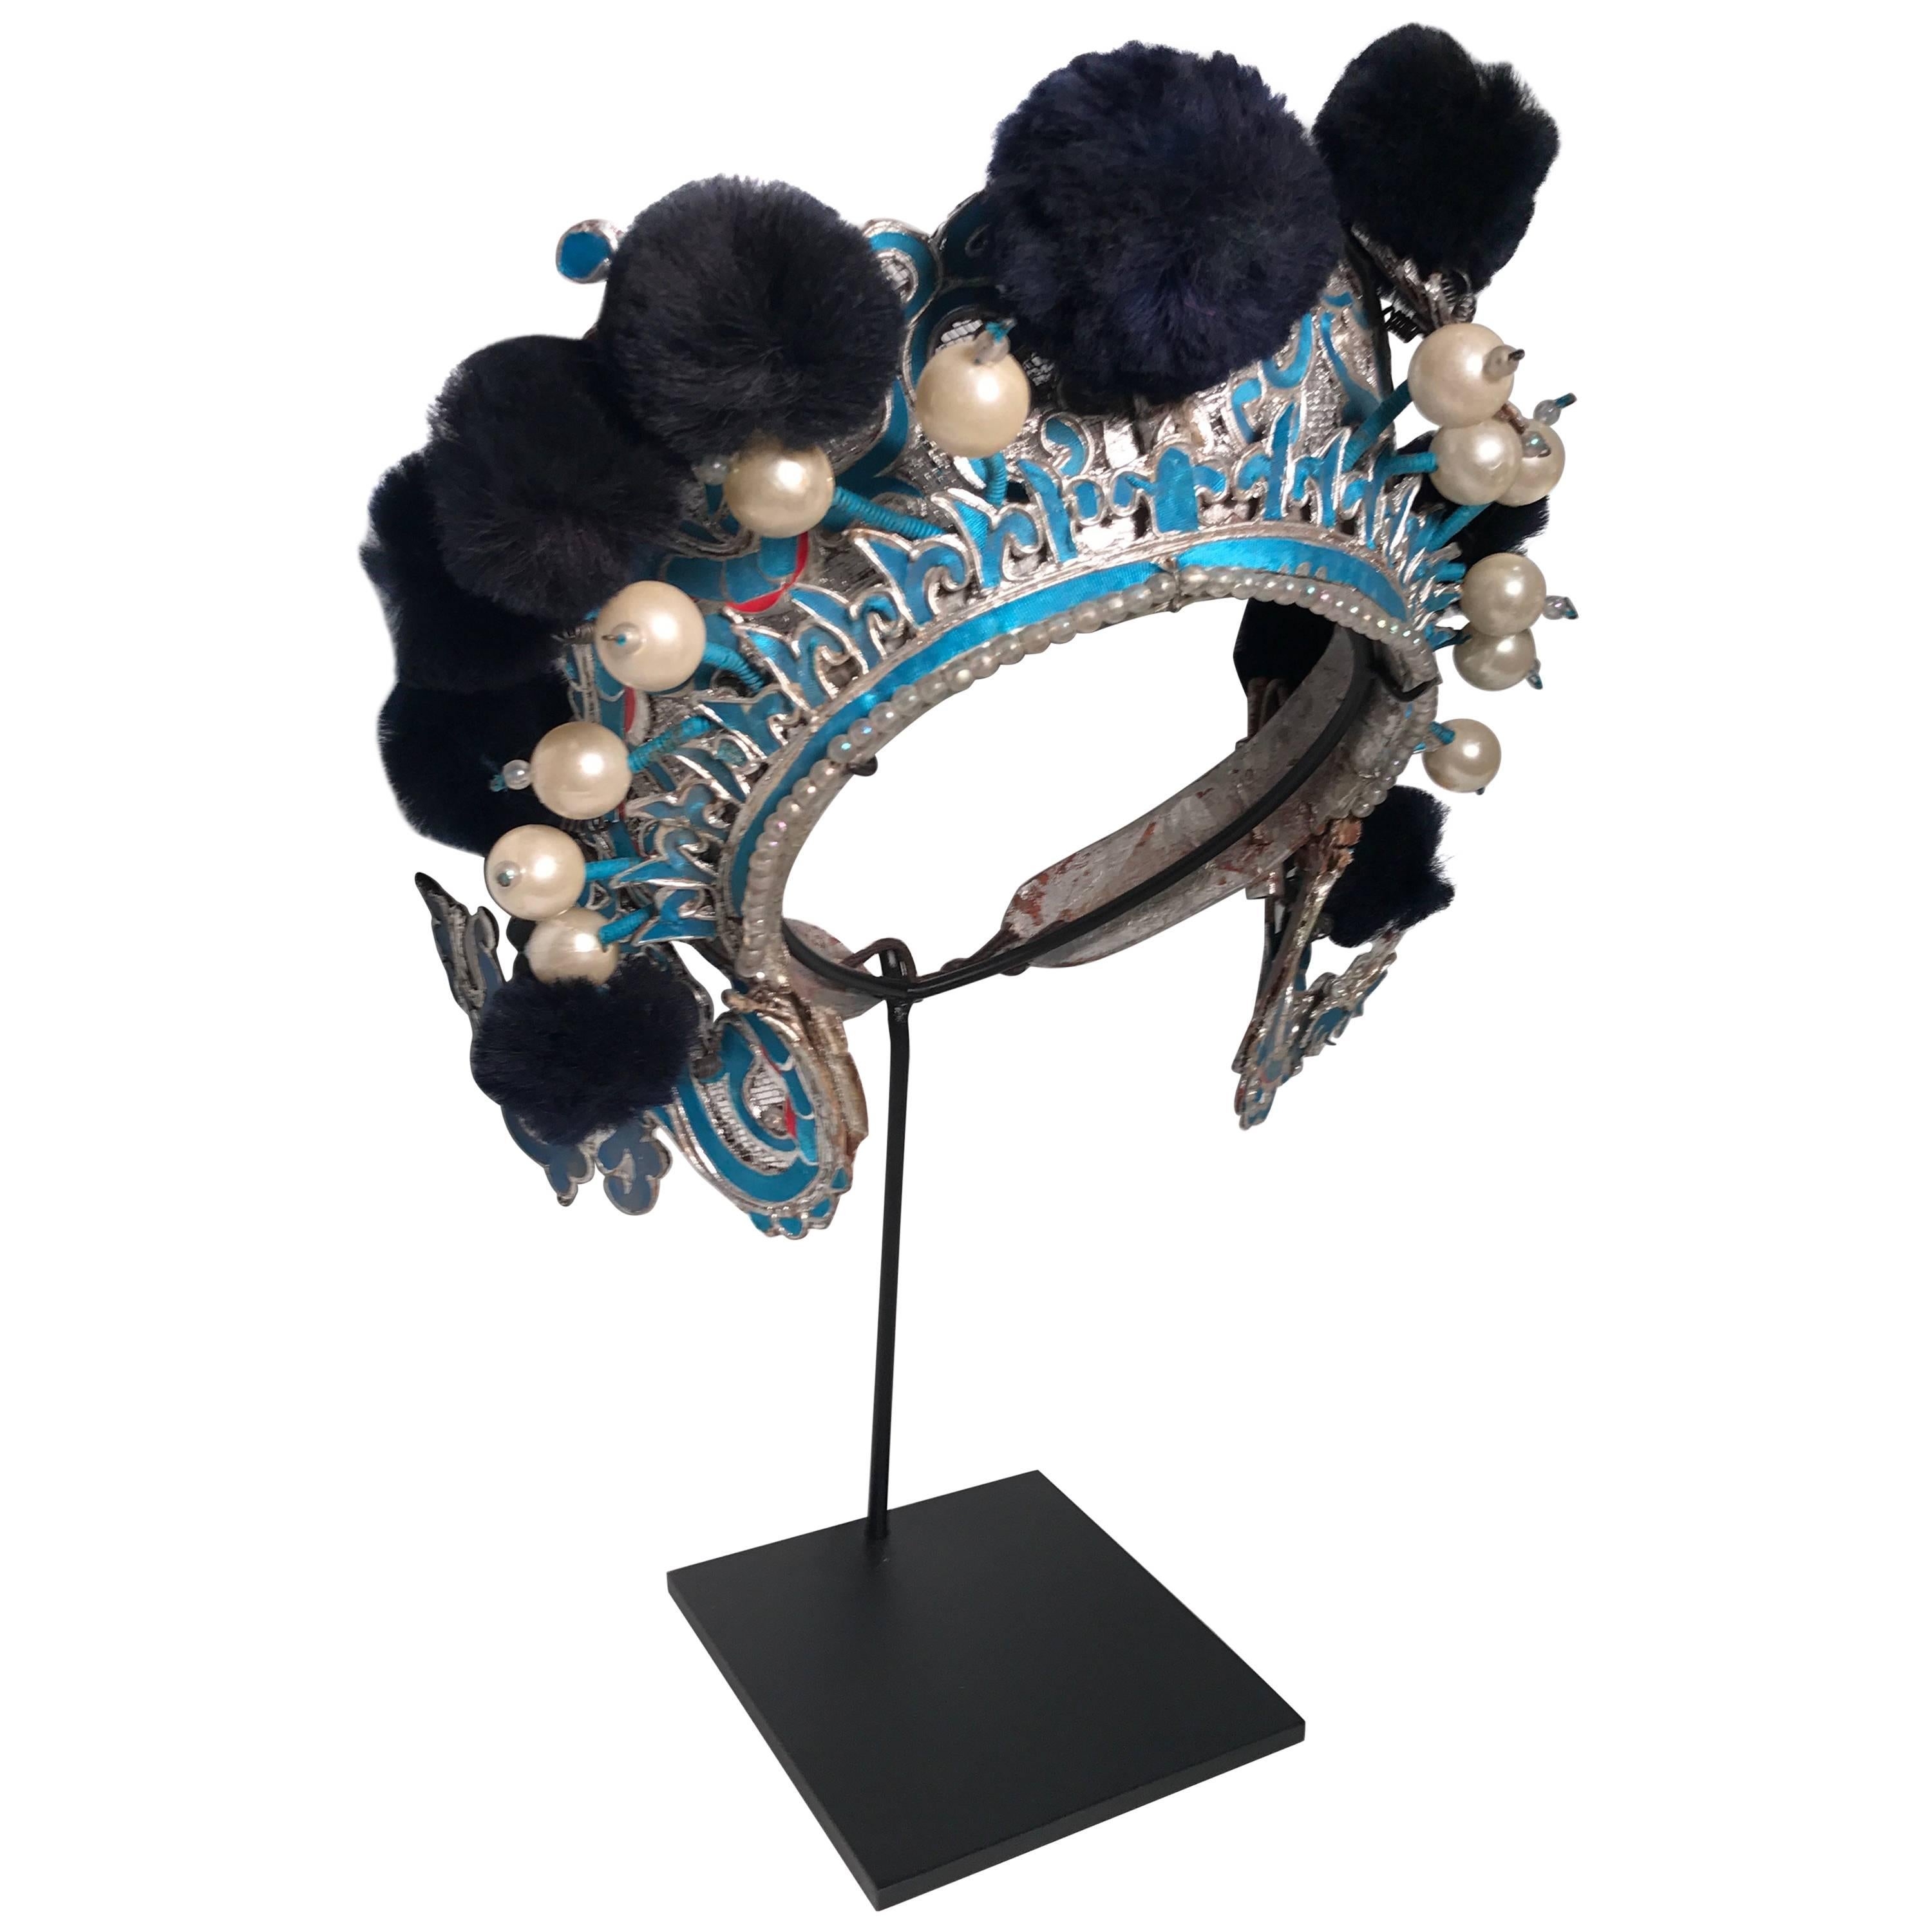 Vintage Chinese Theatre Headdress in Turquoise with Midnight Blue Pom Poms